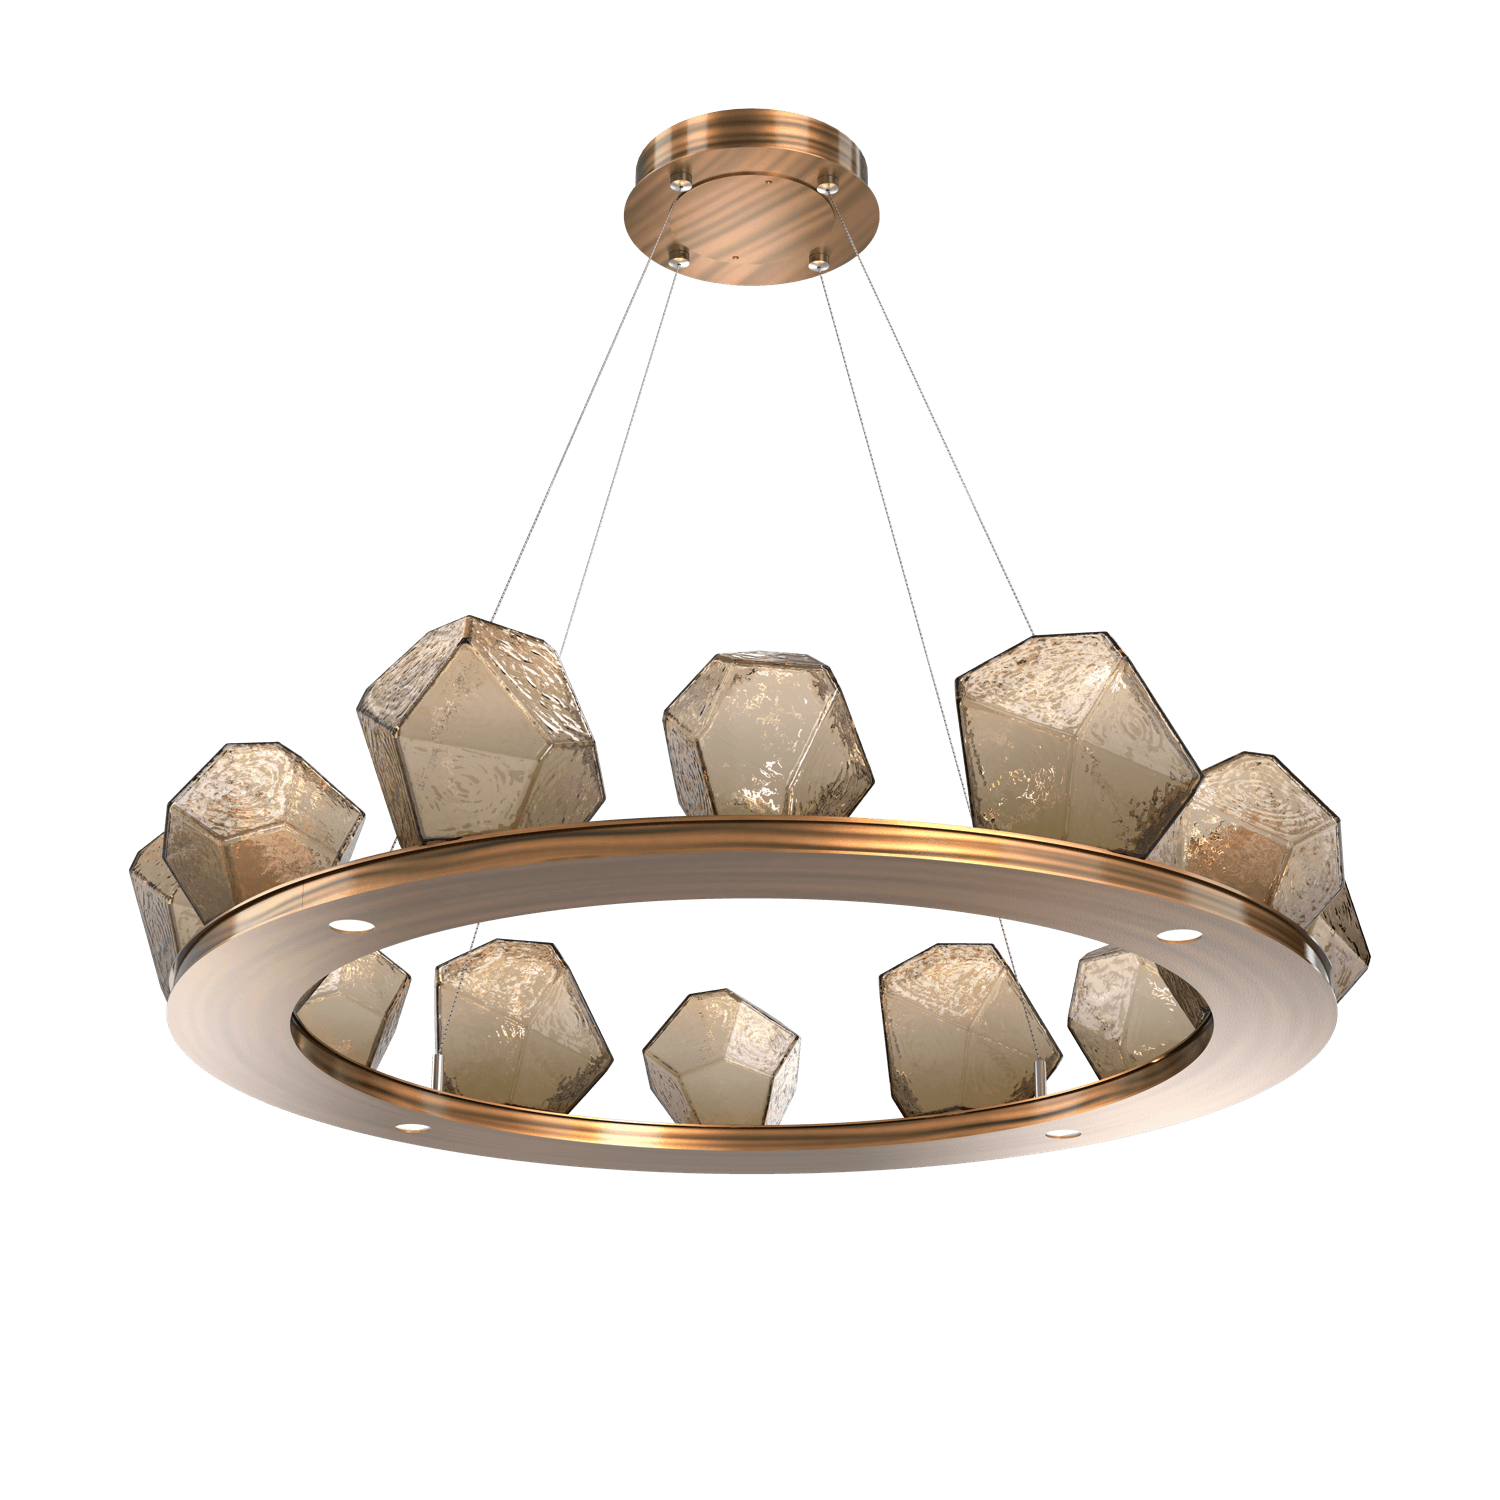 CHB0039-0C-RB-B-Hammerton-Studio-Gem-37-inch-ring-chandelier-with-oil-rubbed-bronze-finish-and-bronze-blown-glass-shades-and-LED-lamping